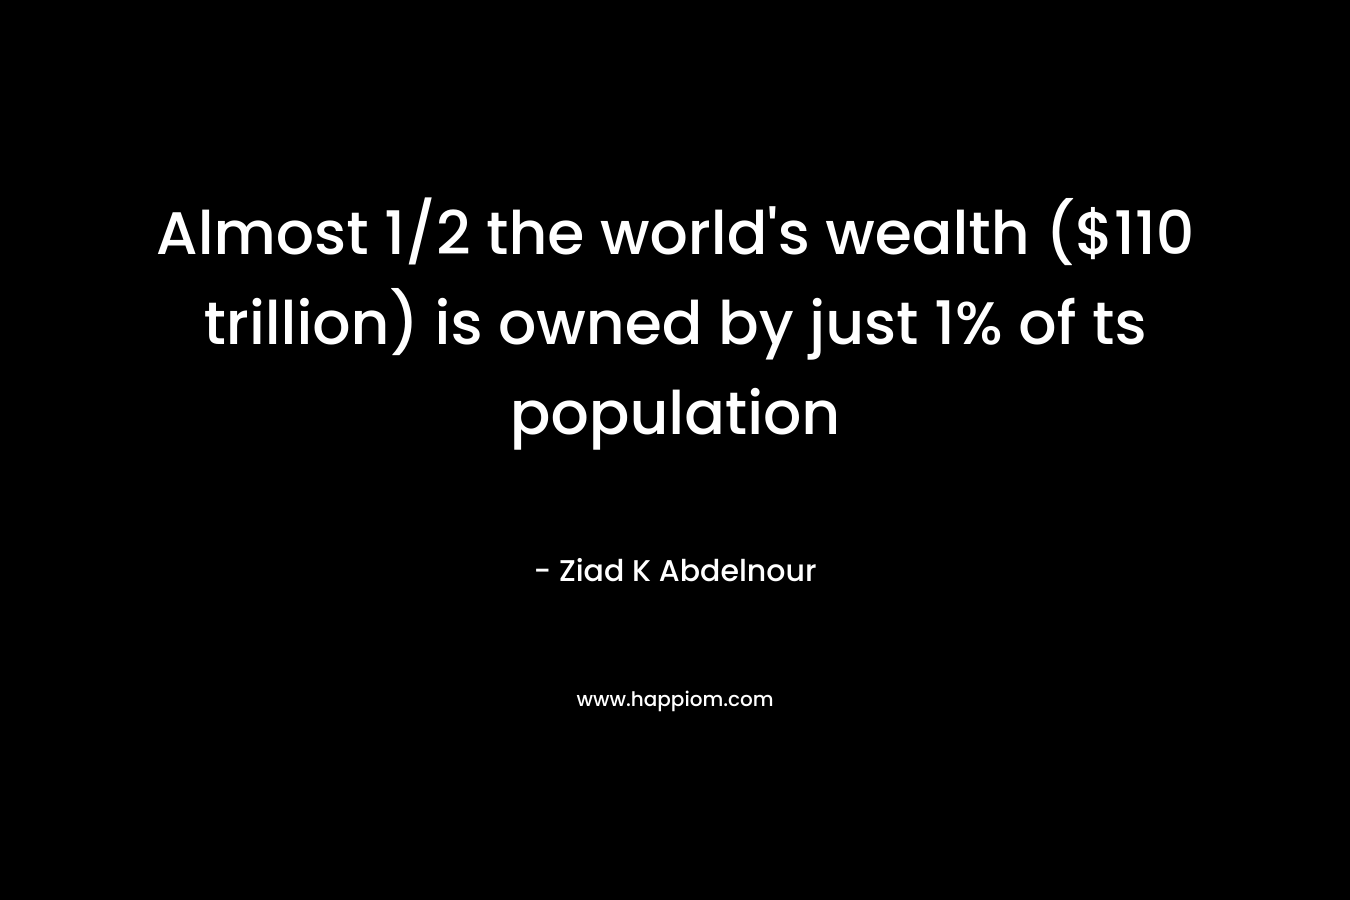 Almost 1/2 the world’s wealth ($110 trillion) is owned by just 1% of ts population – Ziad K Abdelnour